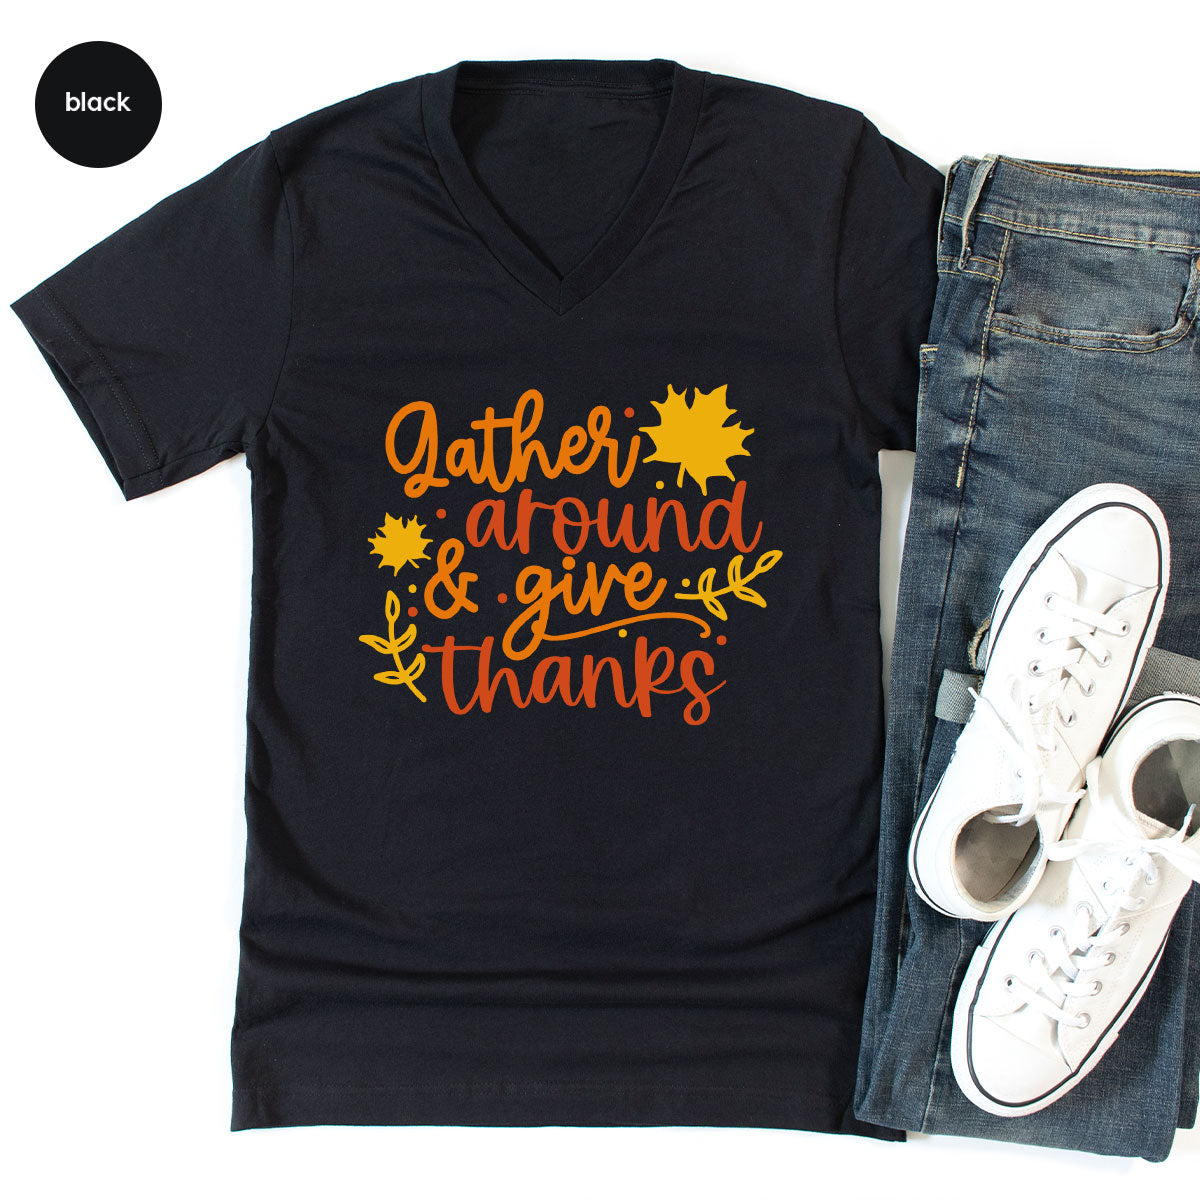 Thanksgiving Sweatshirts, Gifts for Family, Kids Fall Clothes, Leaves Graphic Tees, Autumn Toddler Outfits, Thankful Vneck TShirt